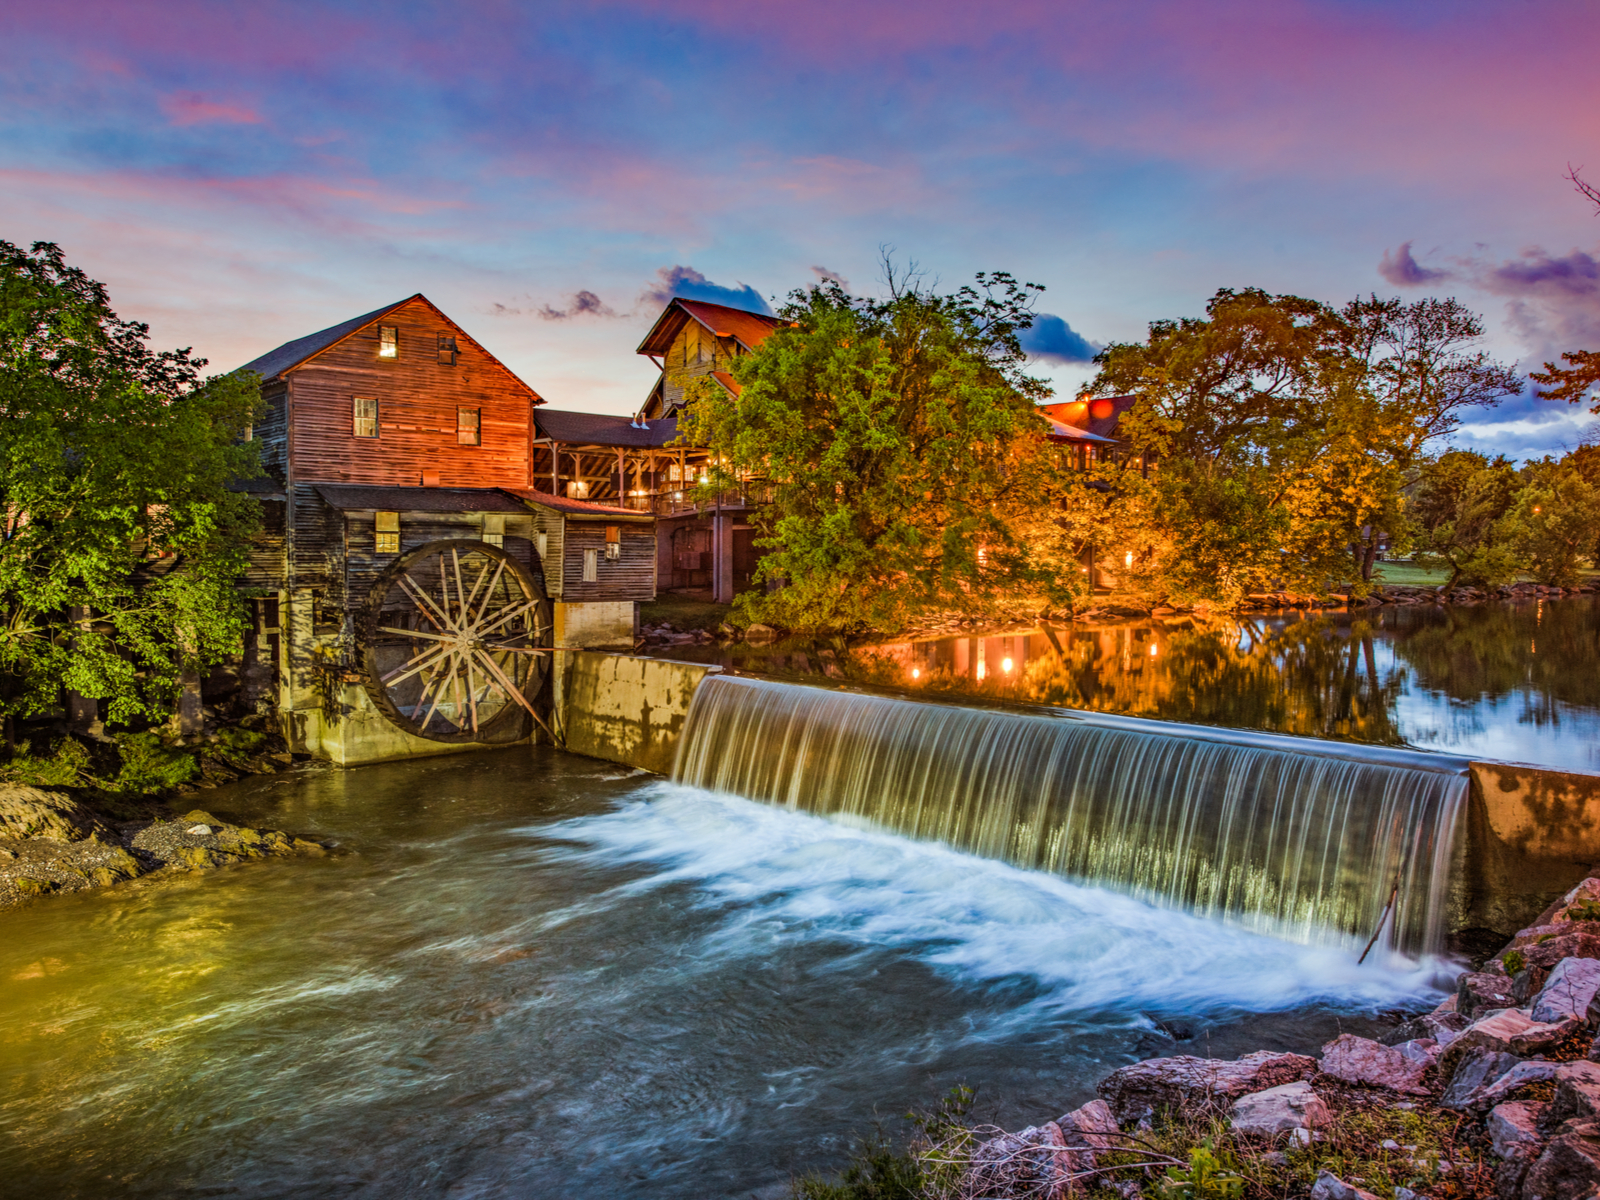 Evening view of the old mill in Pigeon Forge, one of the best things to do in Tennessee, with the river flowing over the dam